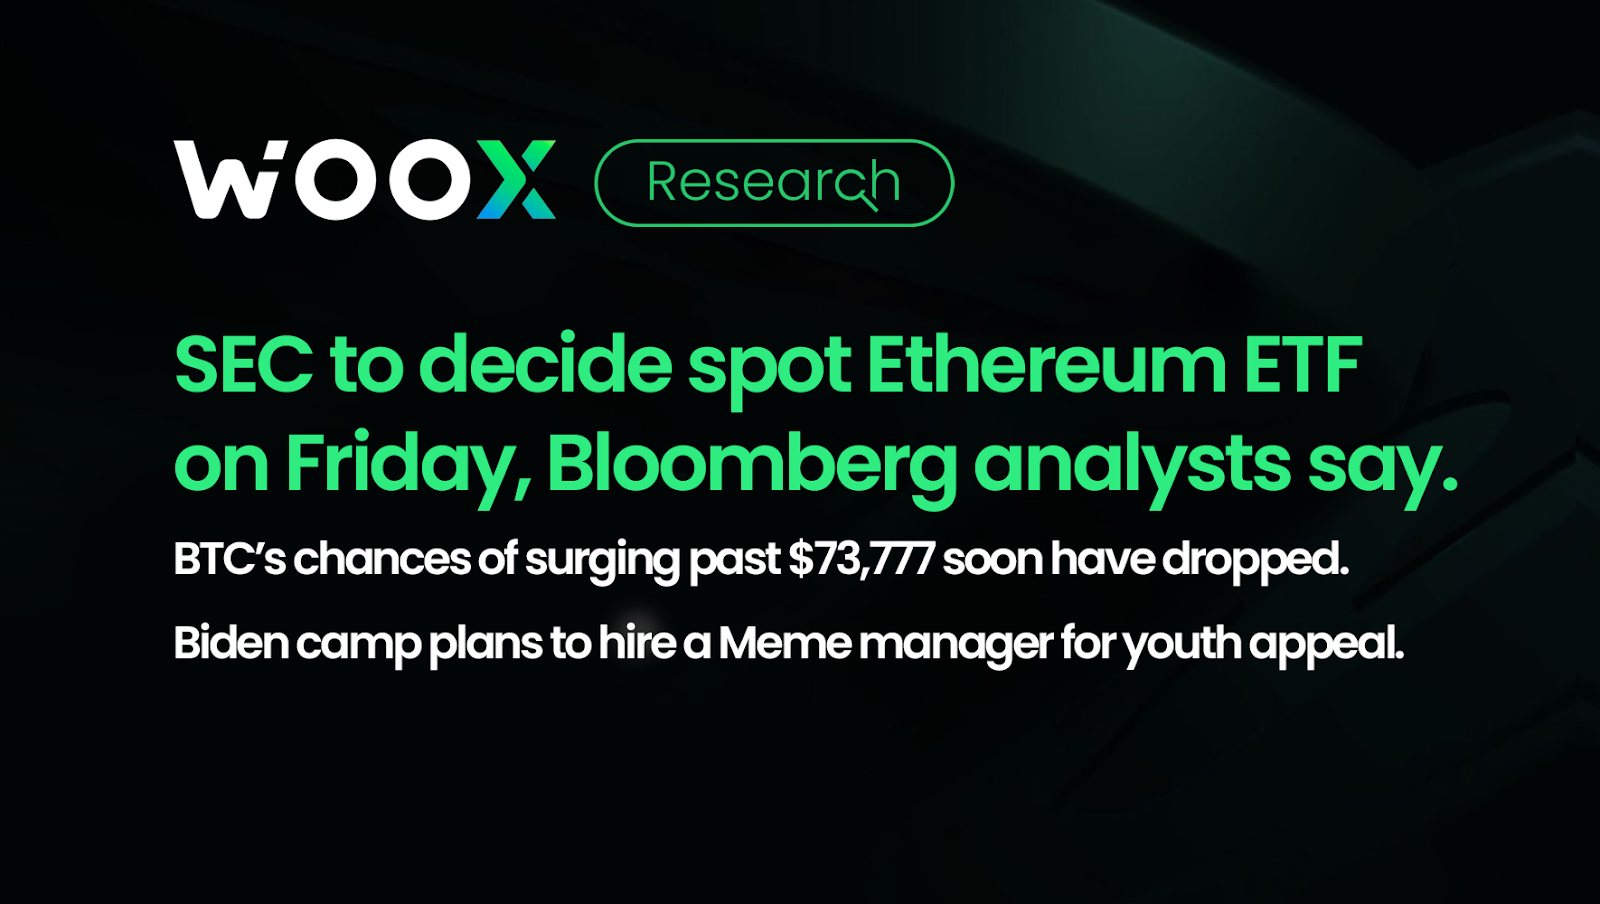 SEC to decide spot Ethereum ETF on Friday, Bloomberg analysts say